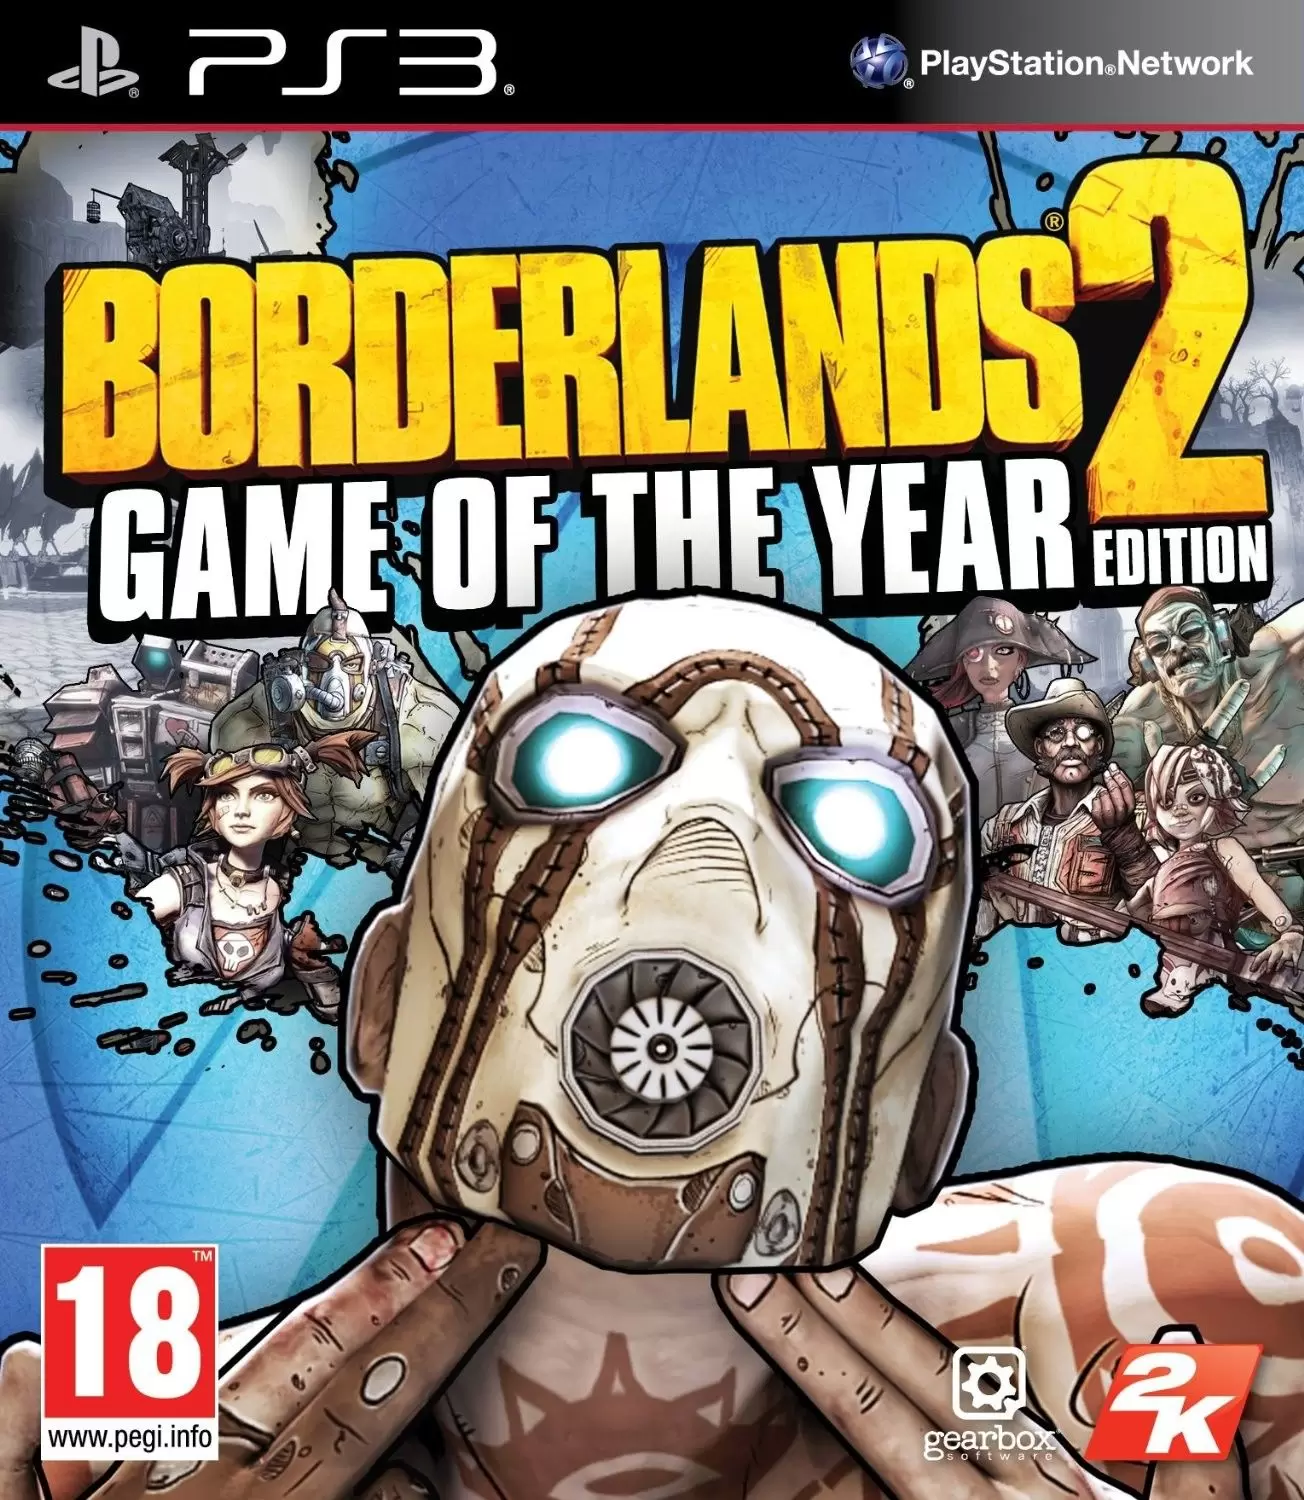 PS3 Games - Borderlands 2 Game of the Year Edition